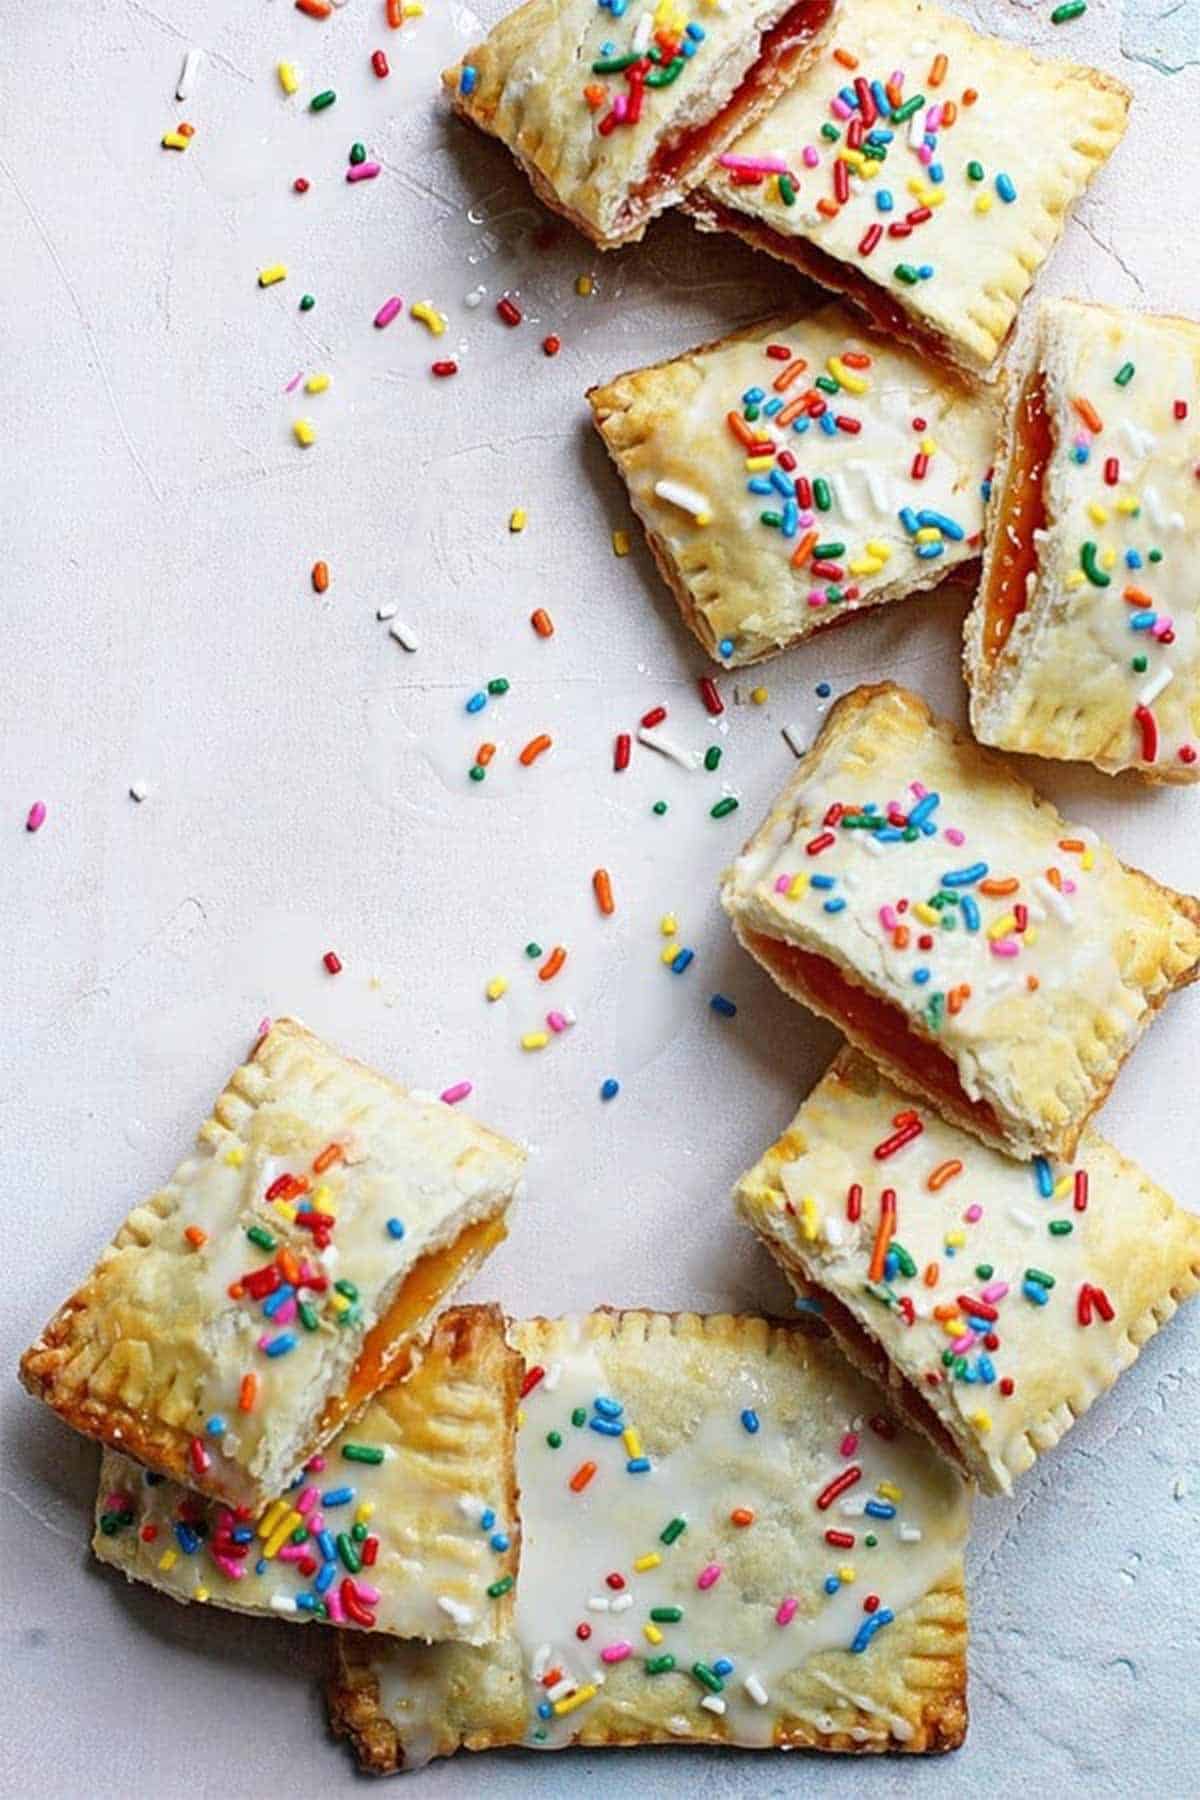 Homemade pop tarts with icing and sprinkles on the table at different angles.